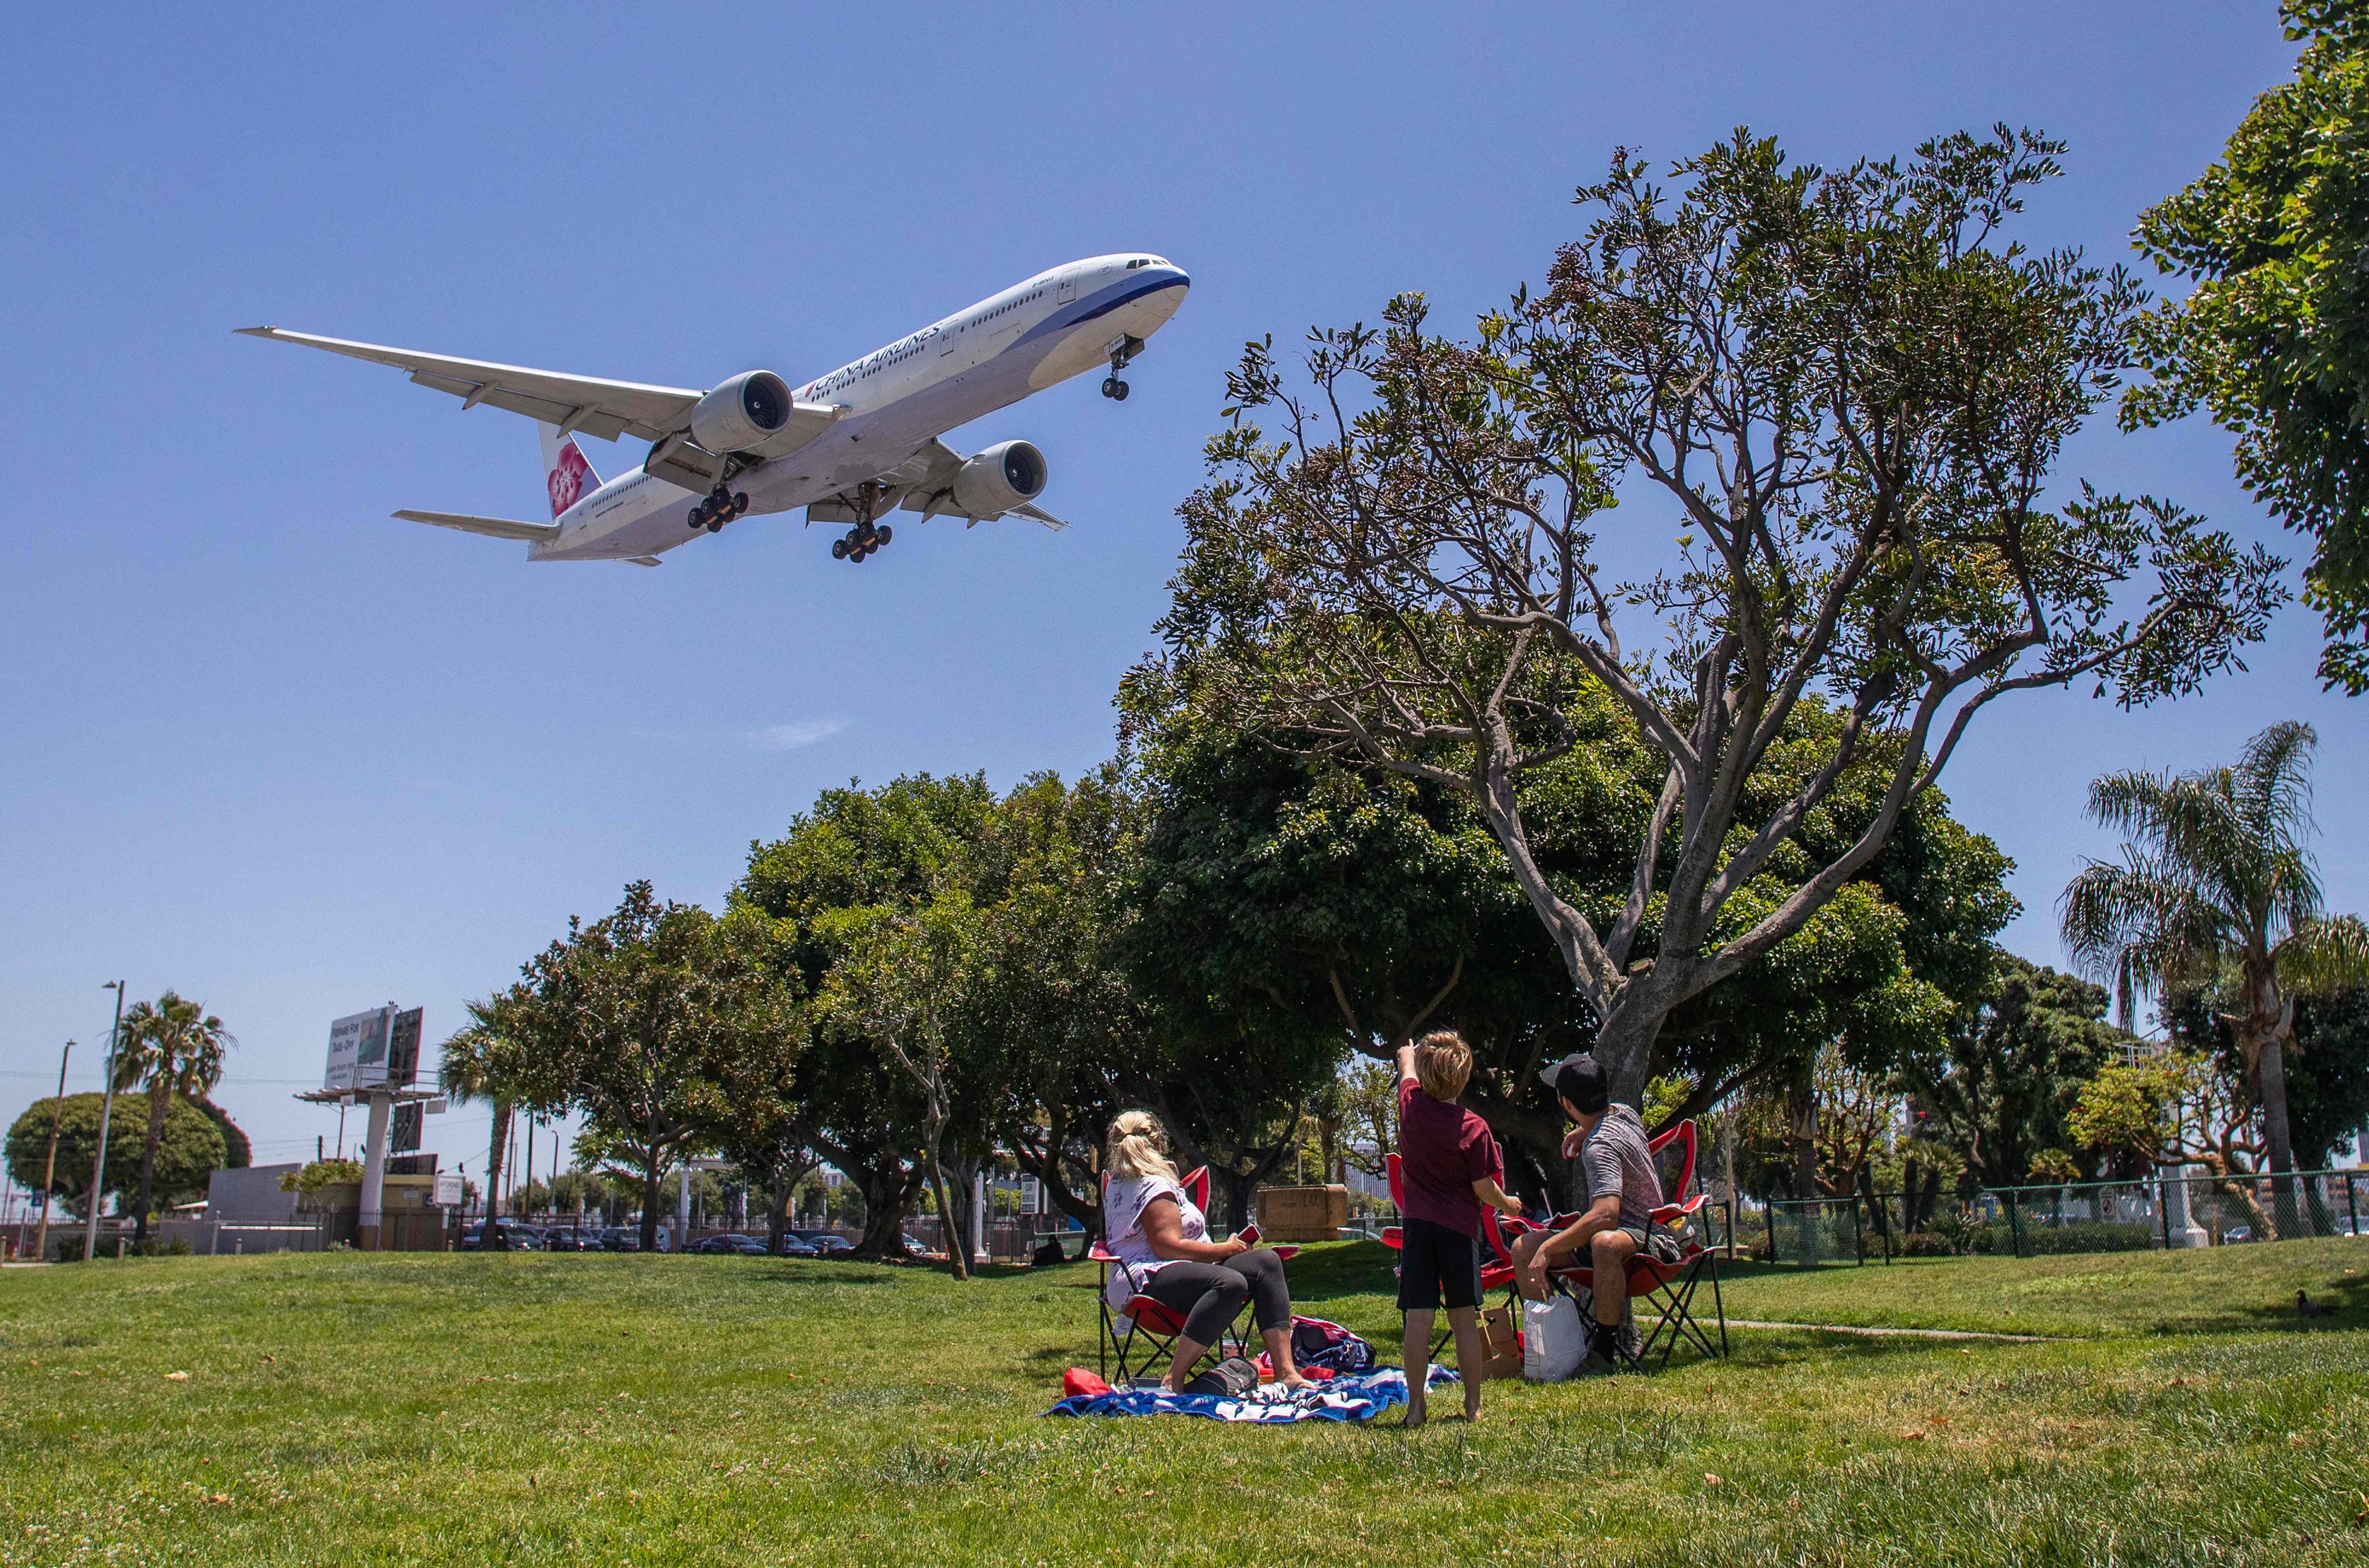 A family watches a China Airlines plane landing at Los Angeles International Airport in May 2020. Photo: AFP